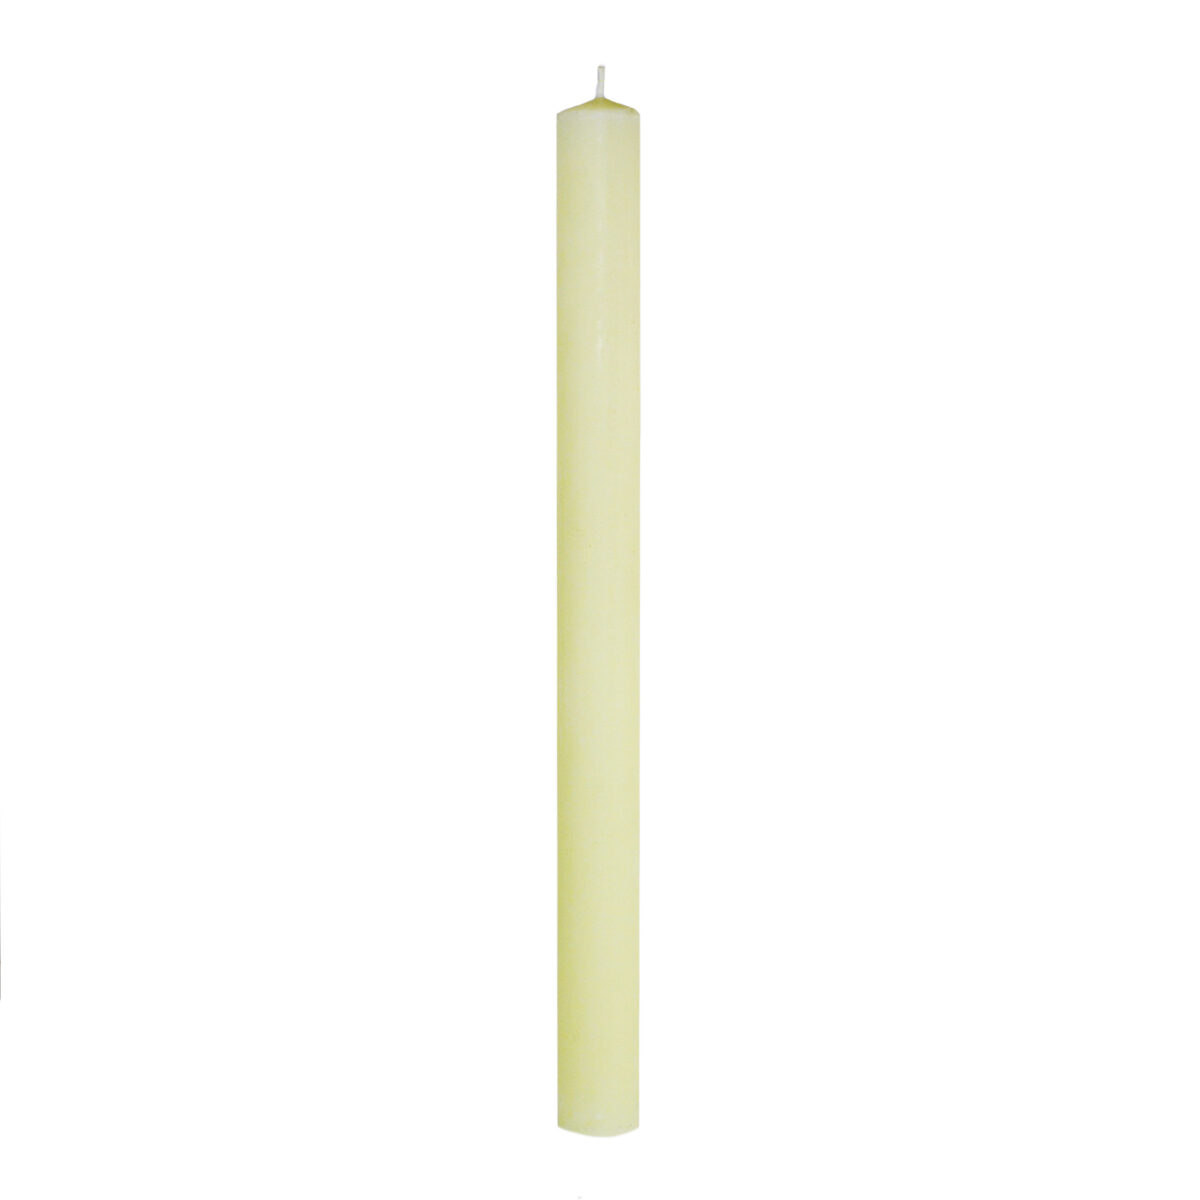 100% BEESWAX 1-1/2" x 17" GROOVE BASE CANDLE STICK